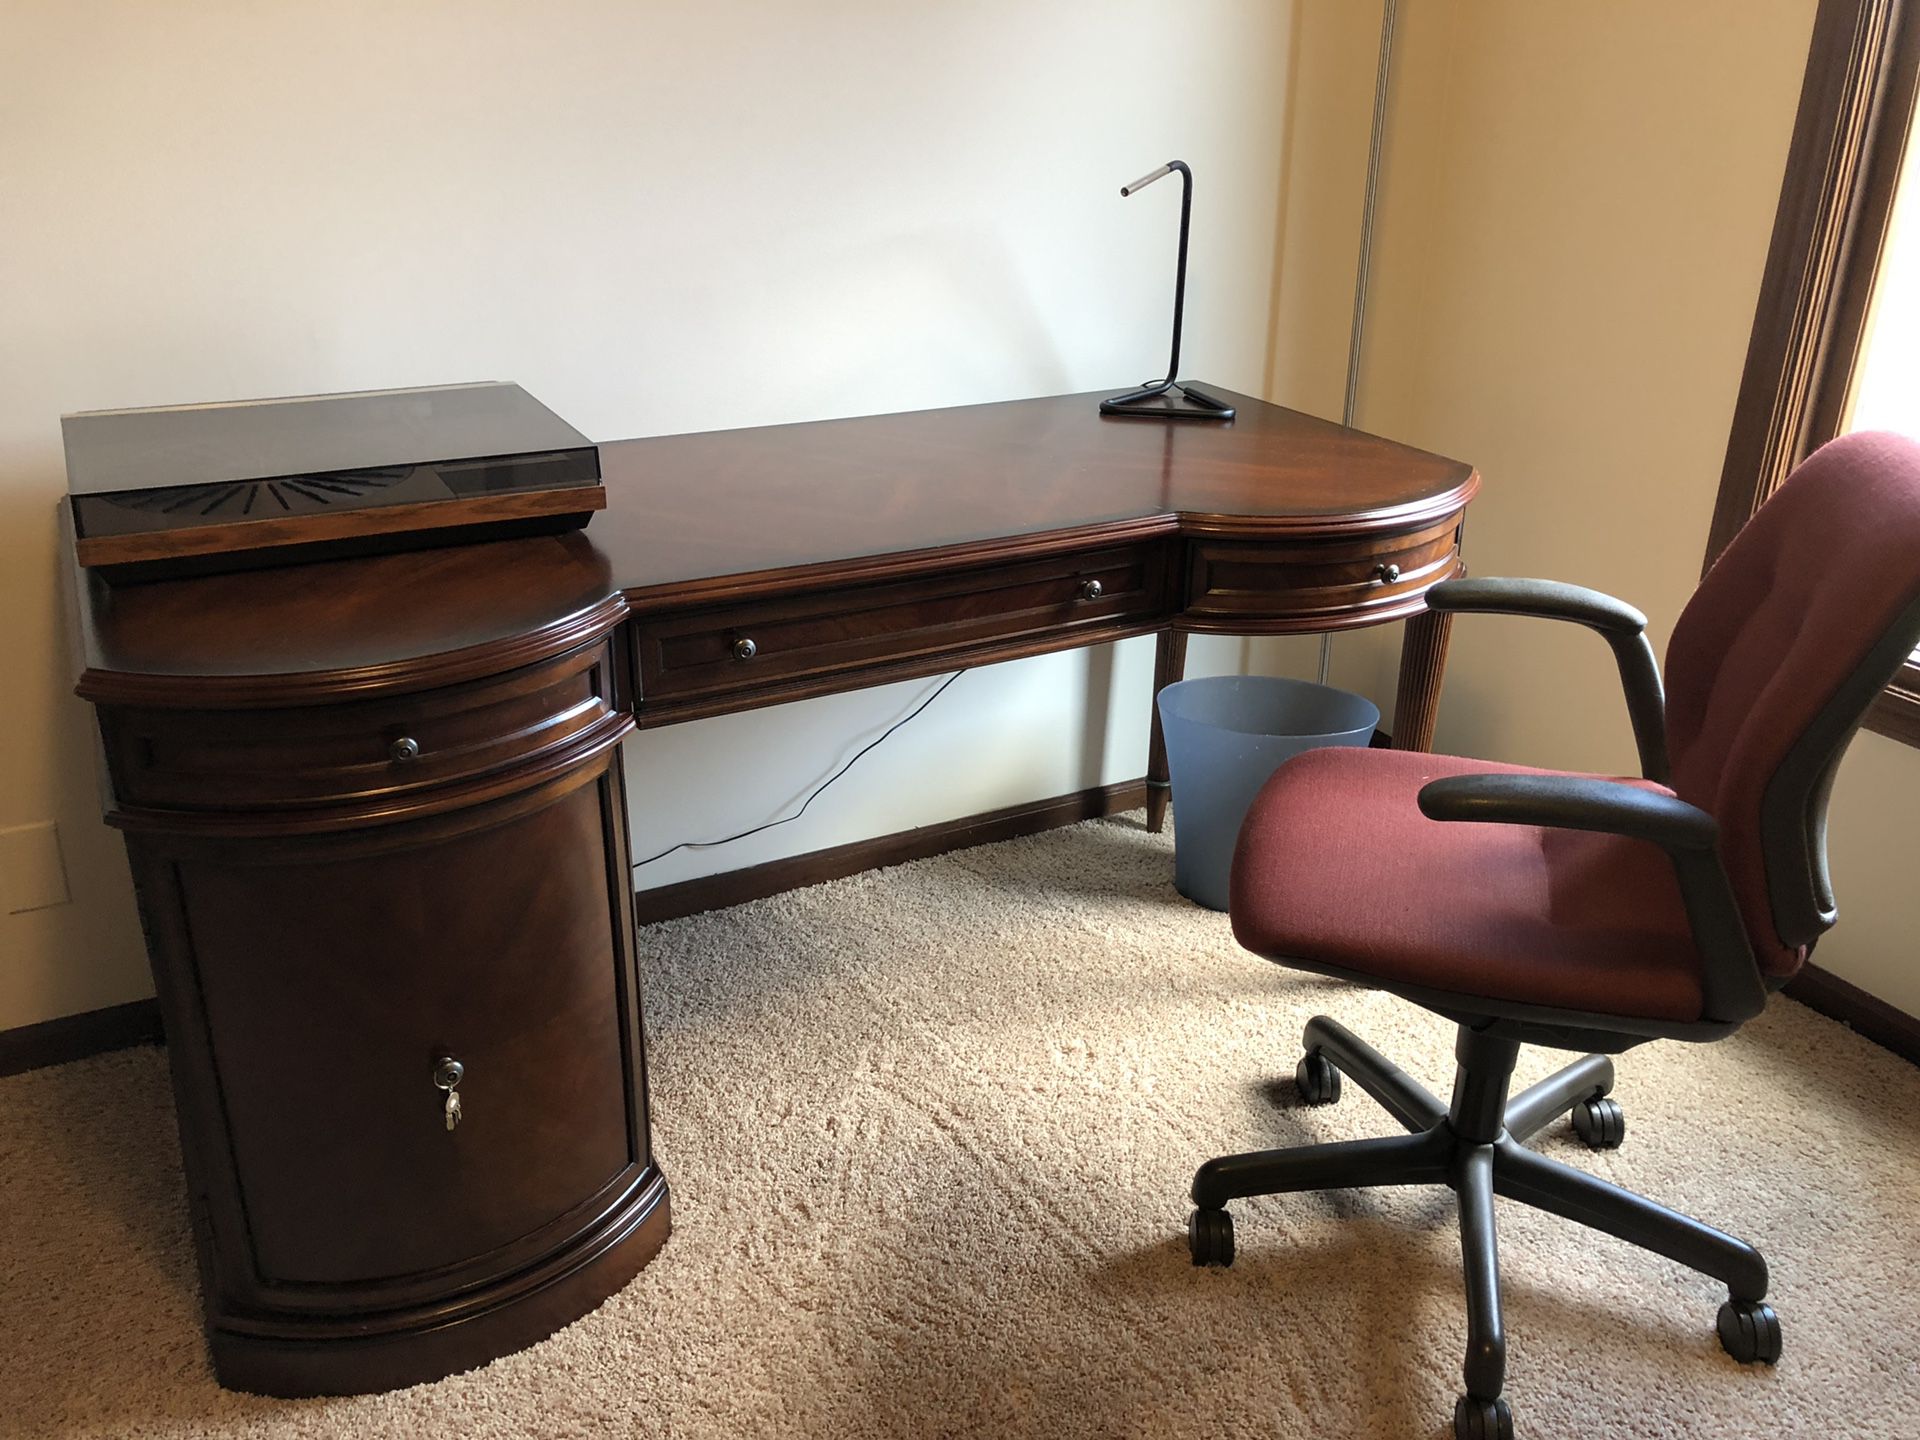 Cherry desk 60 inches wide 25 inches deep. with Chair and floor Lamp